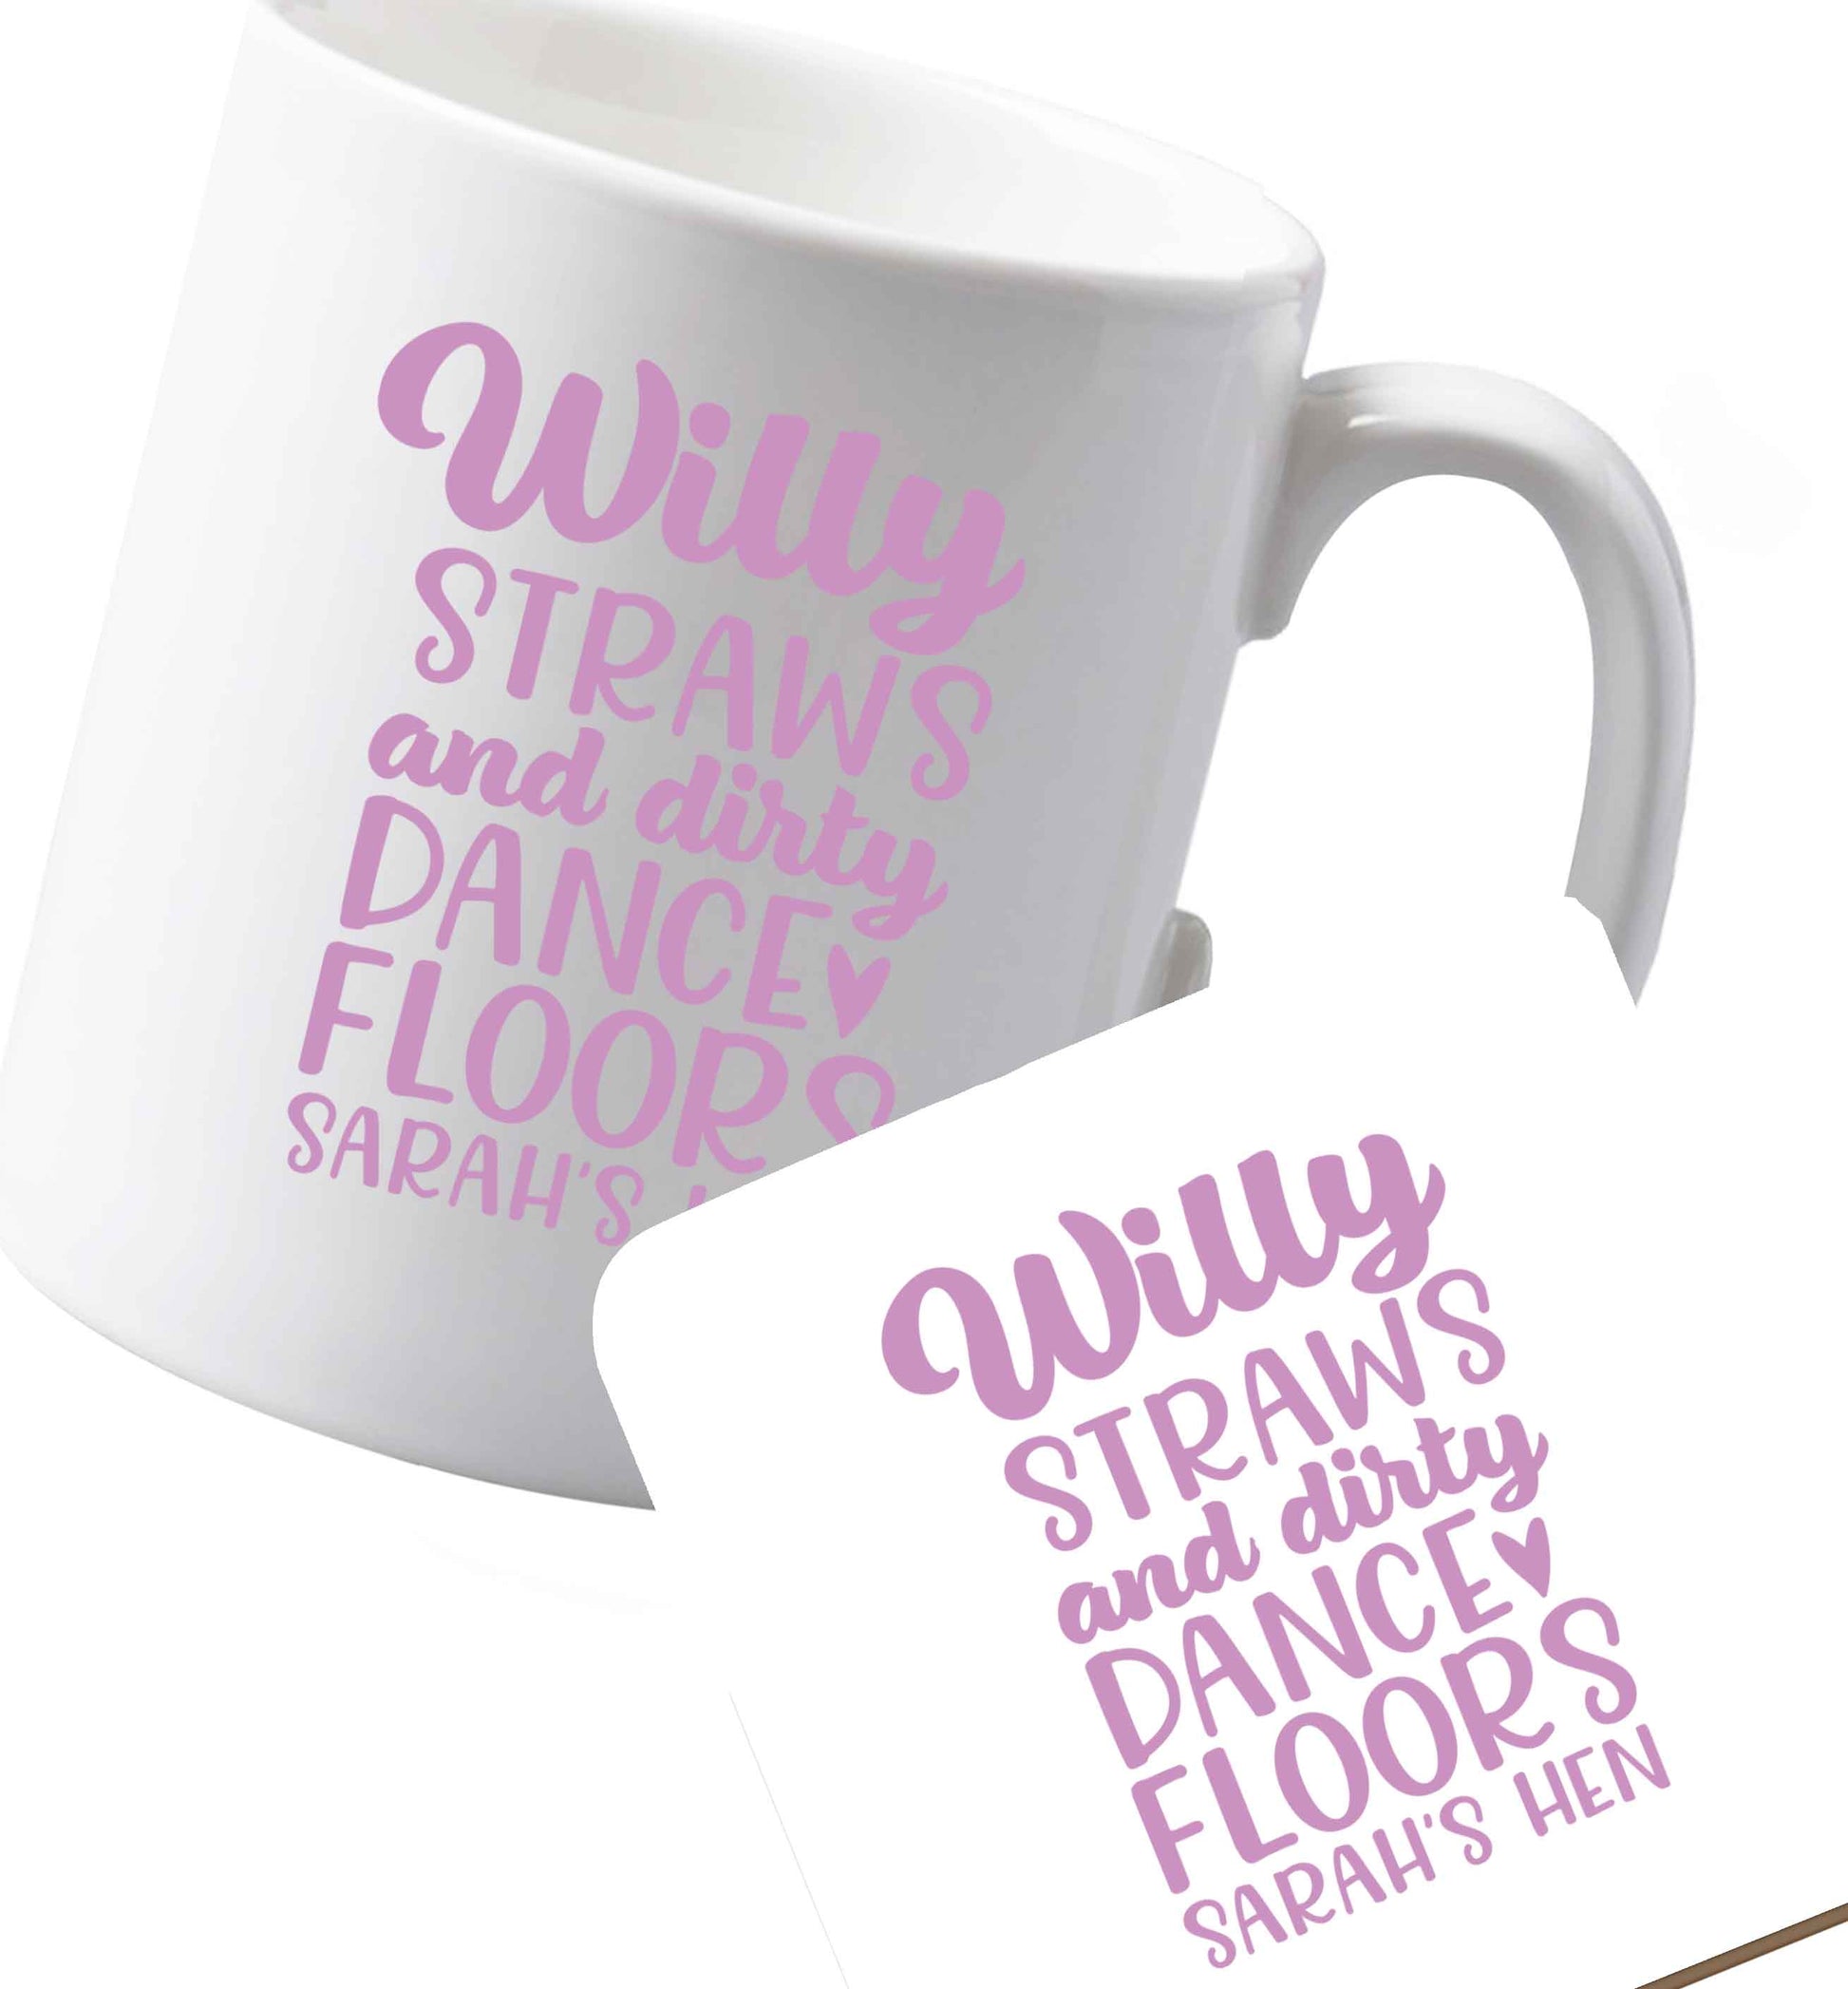 10 oz Ceramic mug and coaster Willy straws and dirty dance floors   both sides